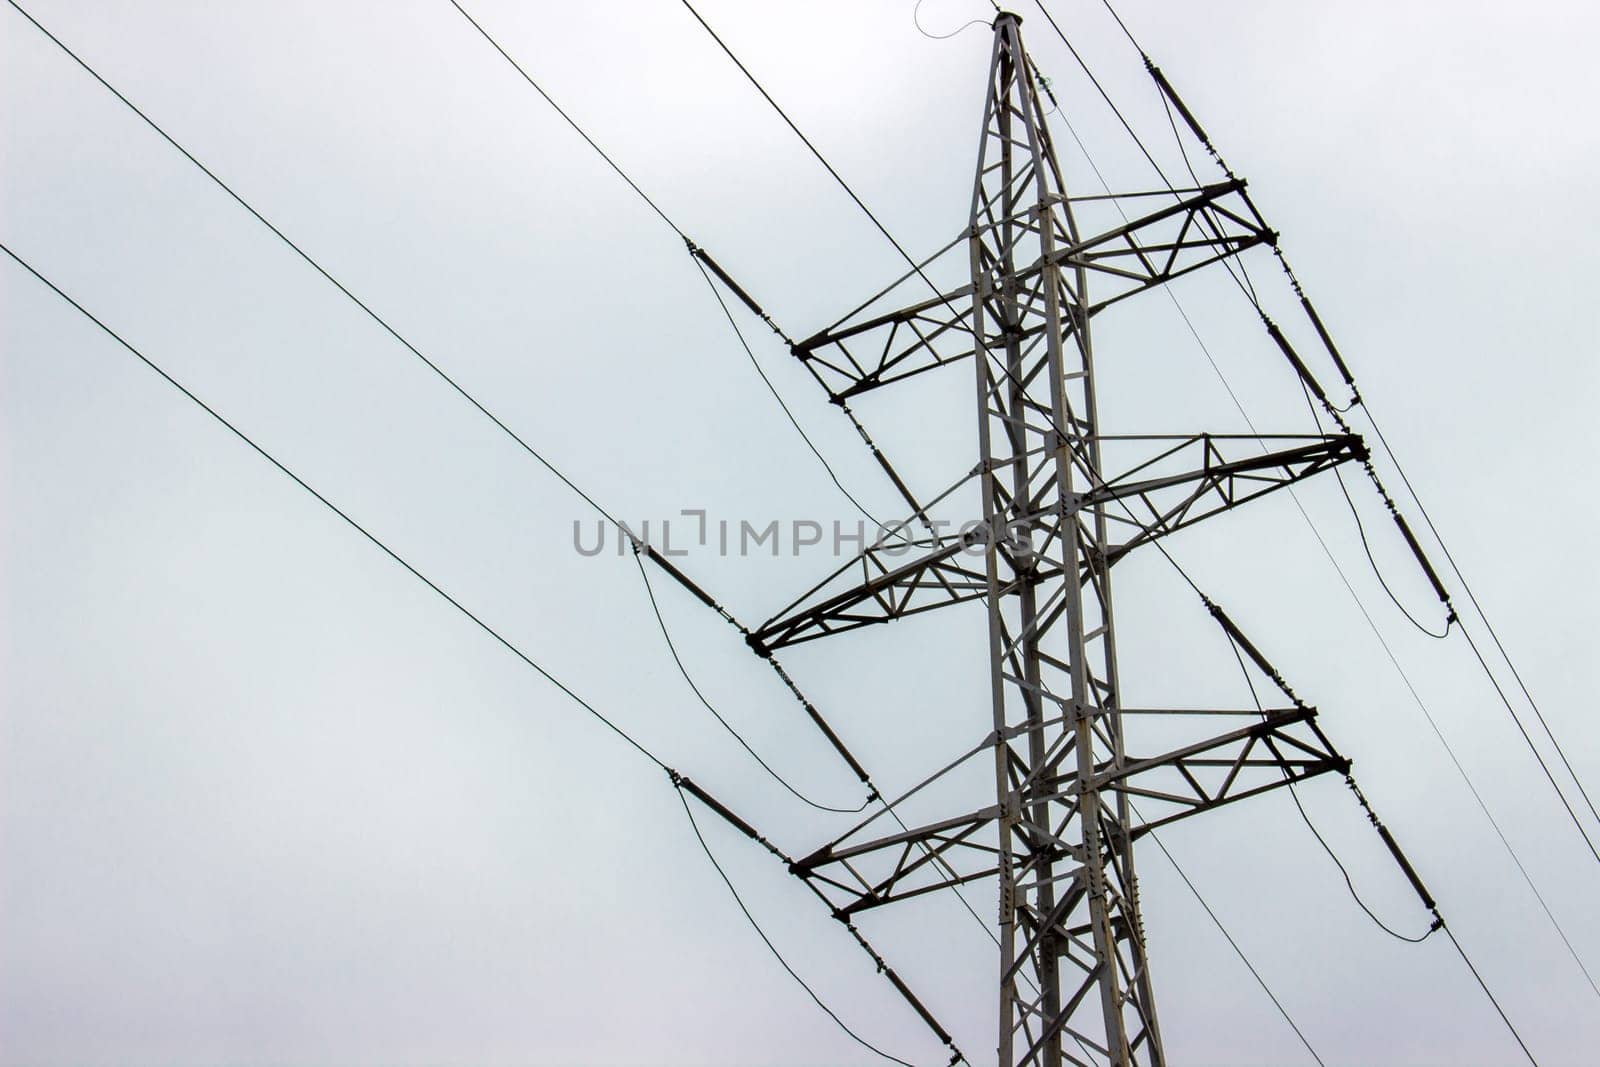 high voltage electrical towers in line. sky background